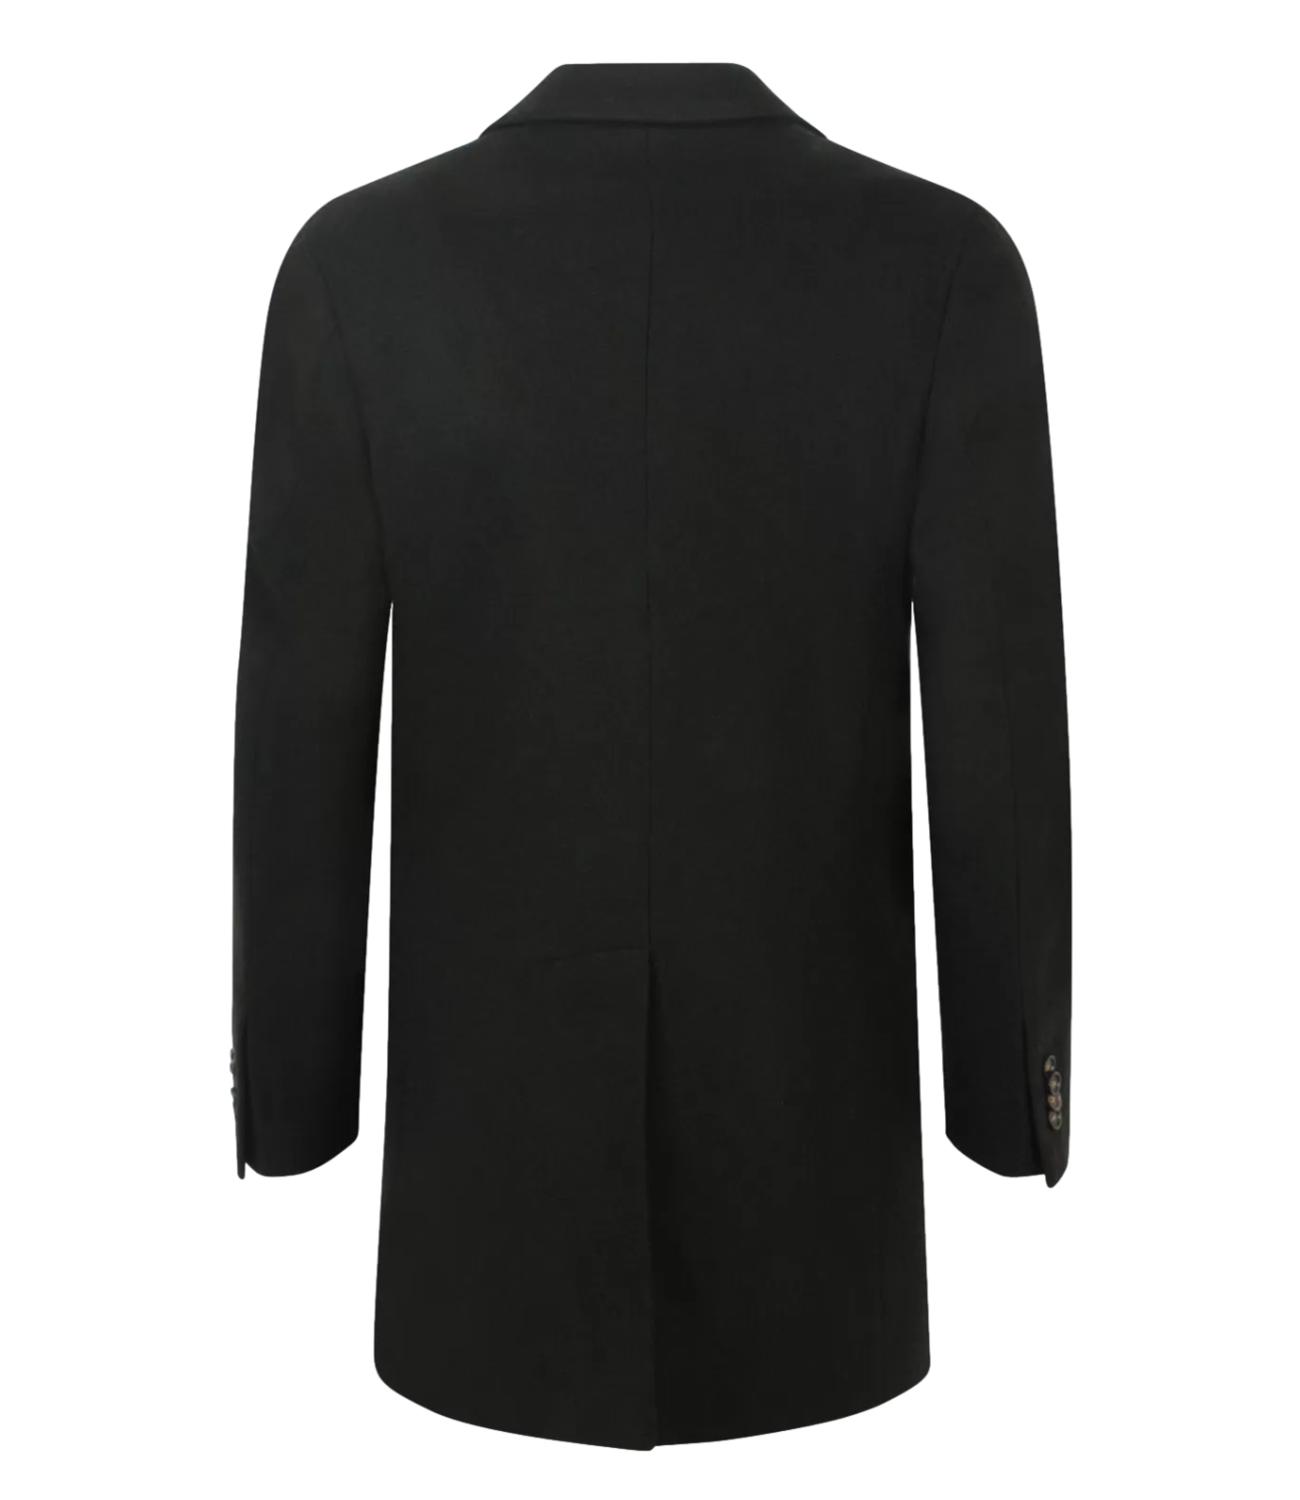 Black three-button men's coat in shaved wool